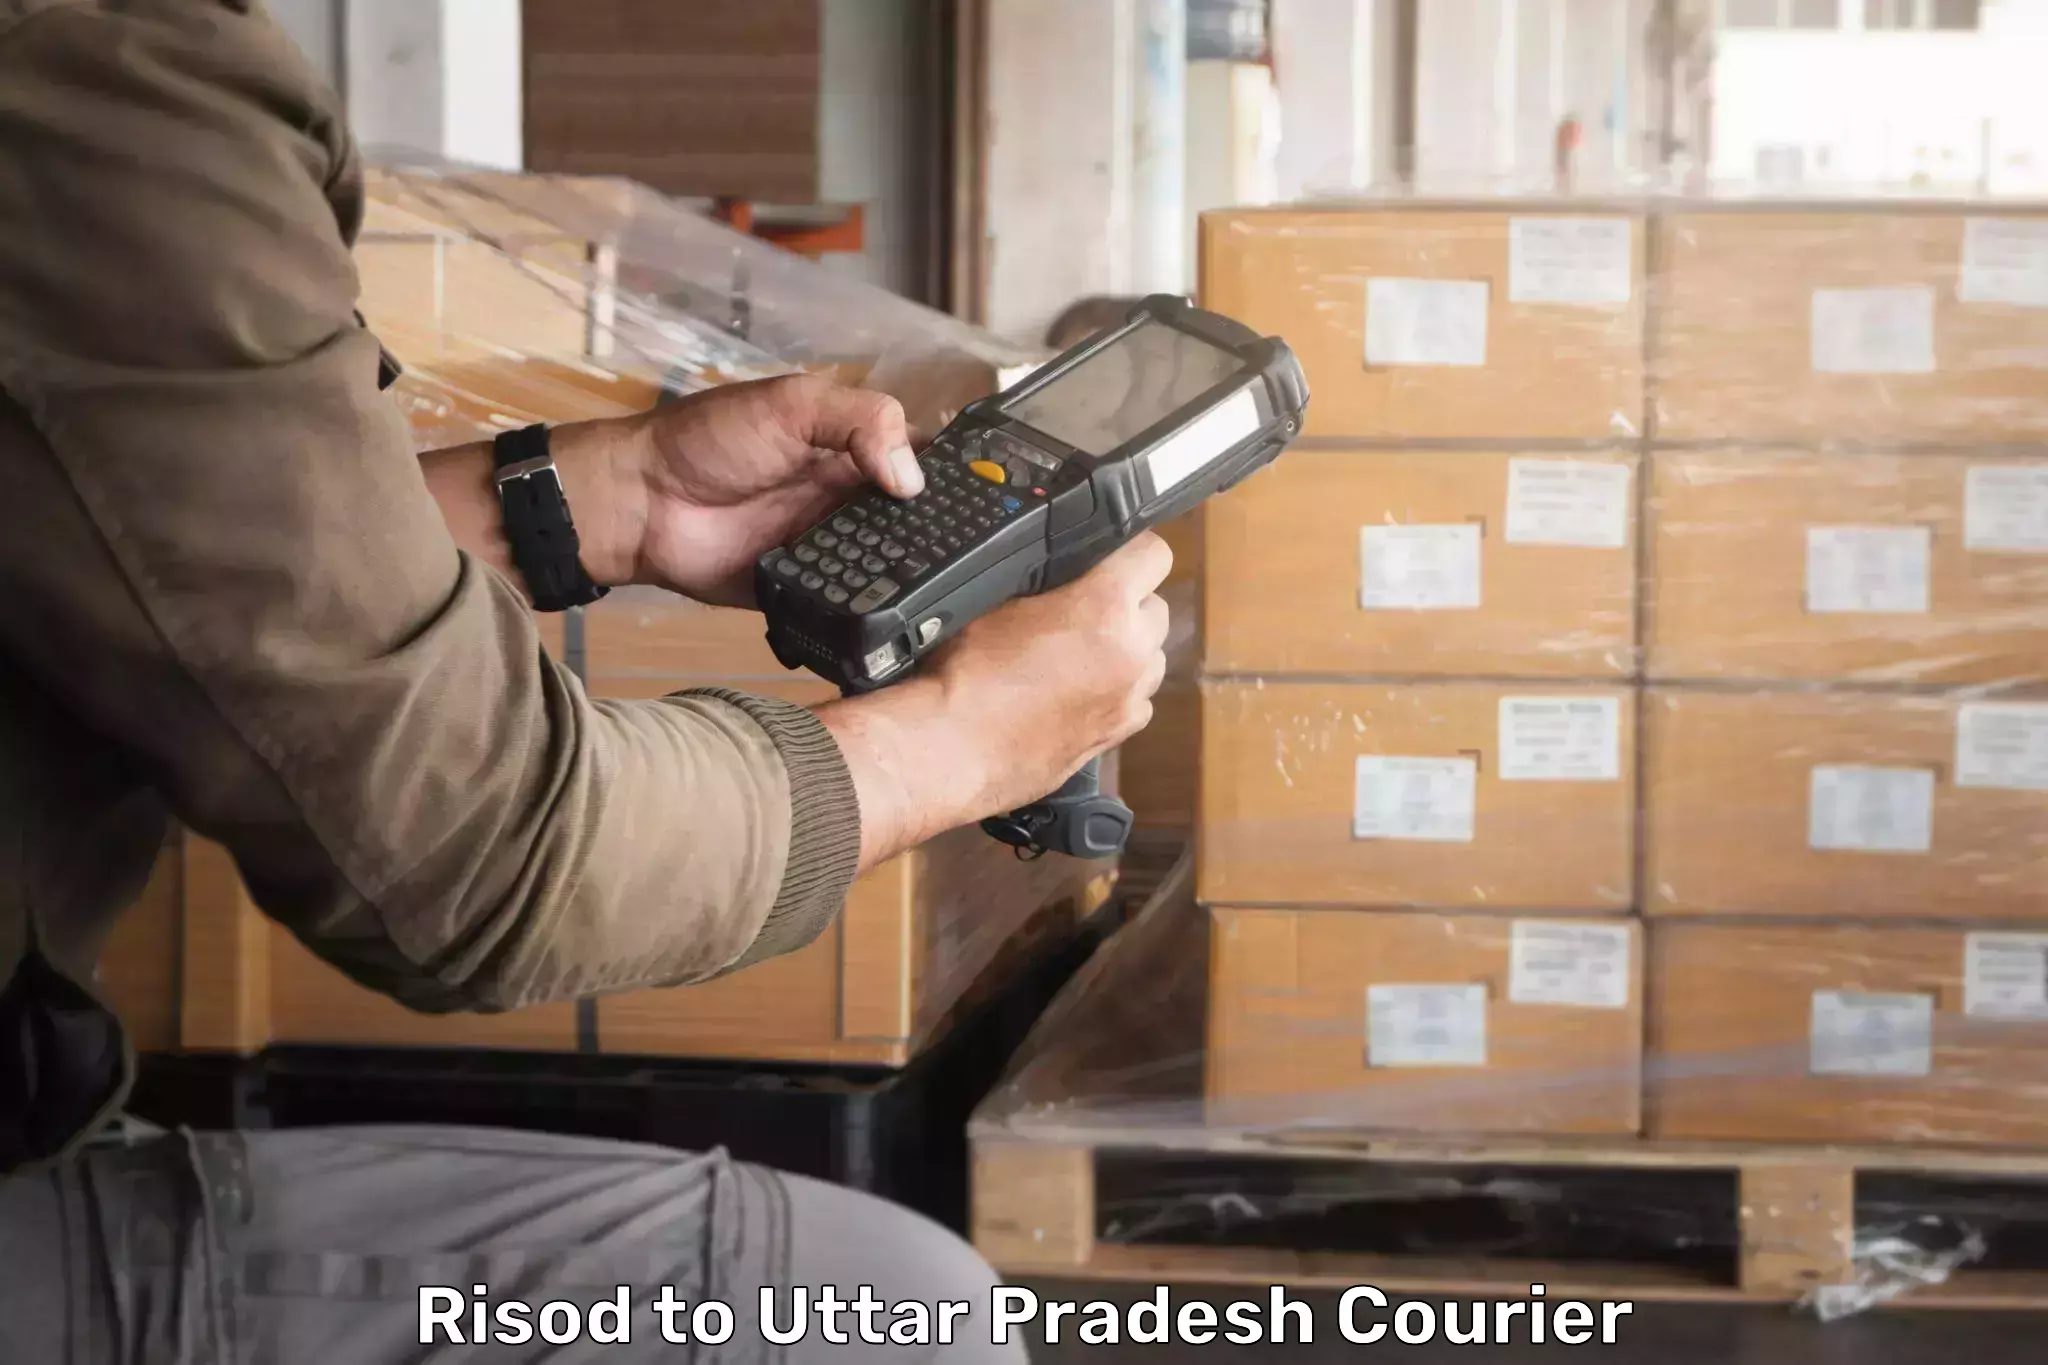 Large package courier Risod to Auraiya